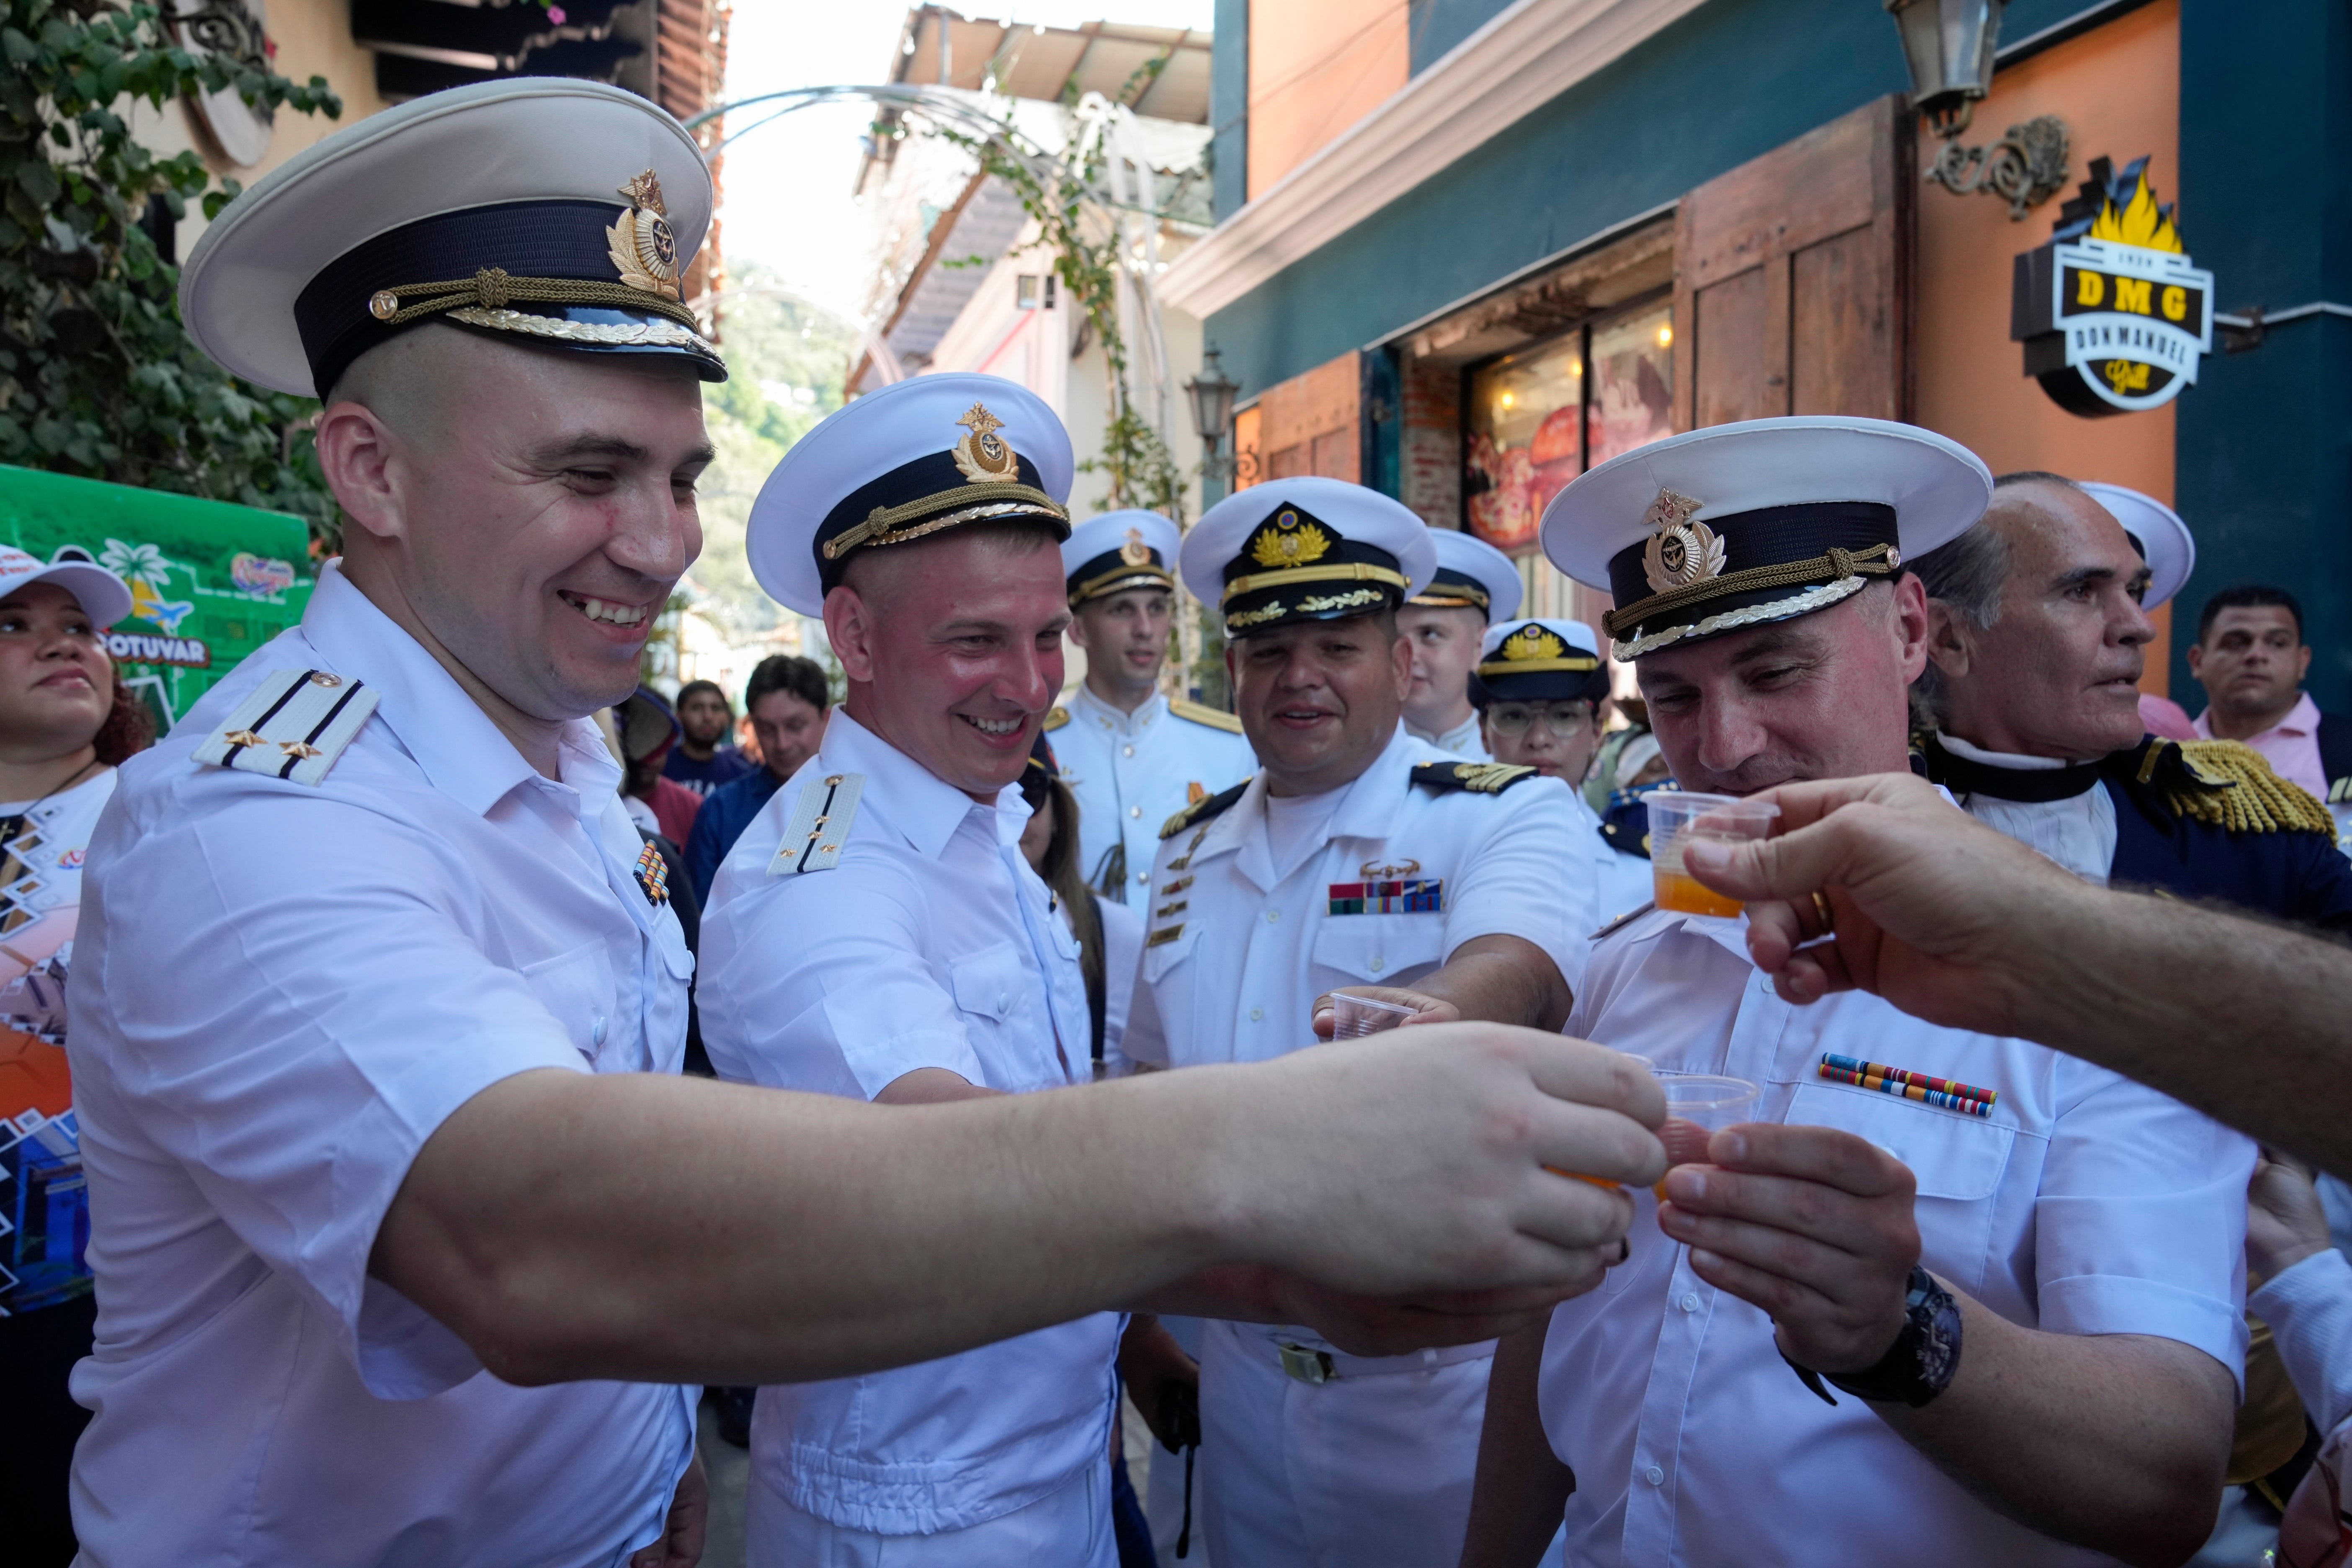 Russian crew members toast with a traditional Venezuelan drink during a welcoming tour by official authorities